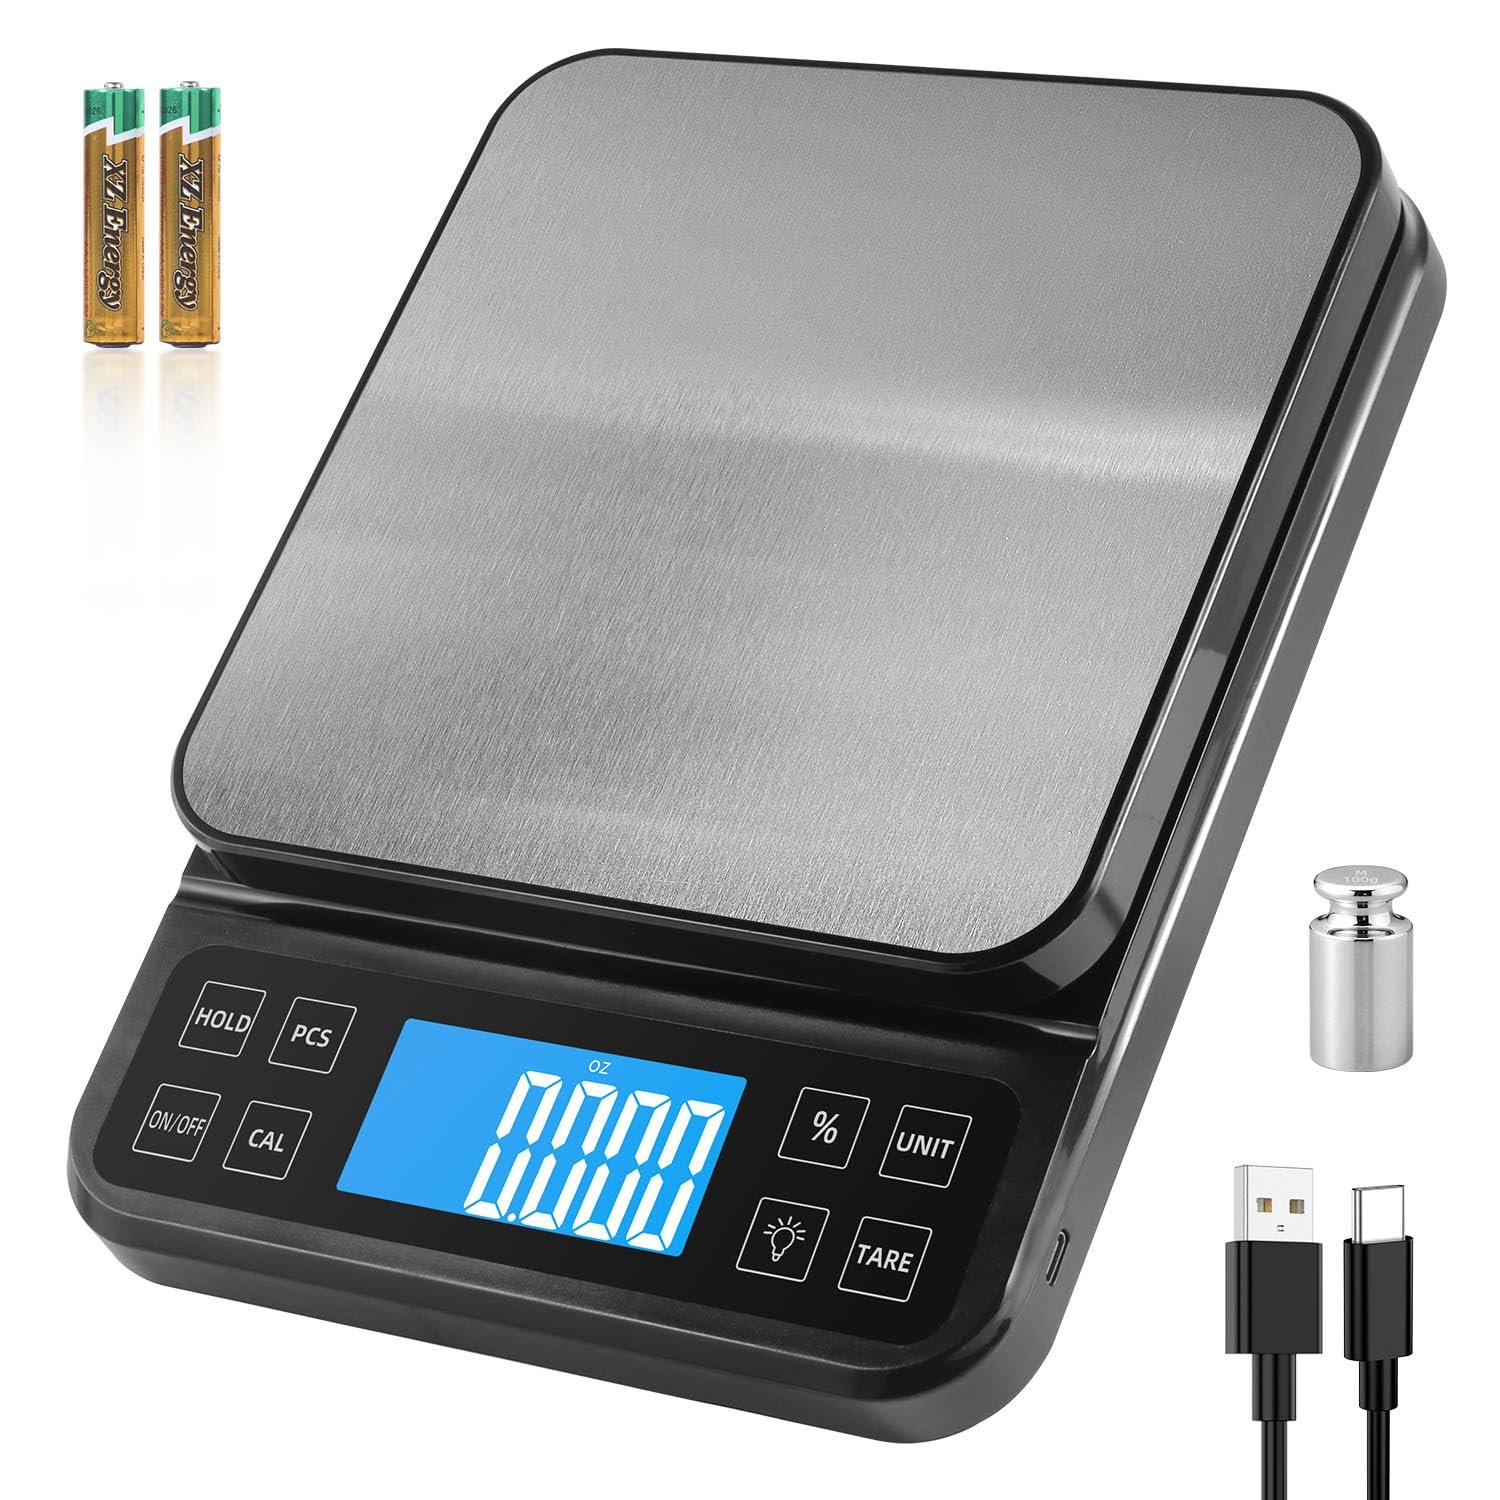 BOMATA Large Kitchen Scale with 0.1g/0.001oz High Precision, Bakery Scale with% Percentage Function, Capacity 5kg/11lbs, USB Rechargeable, Full-View Angle LCD with Backlight, Stainless Steel Pan…